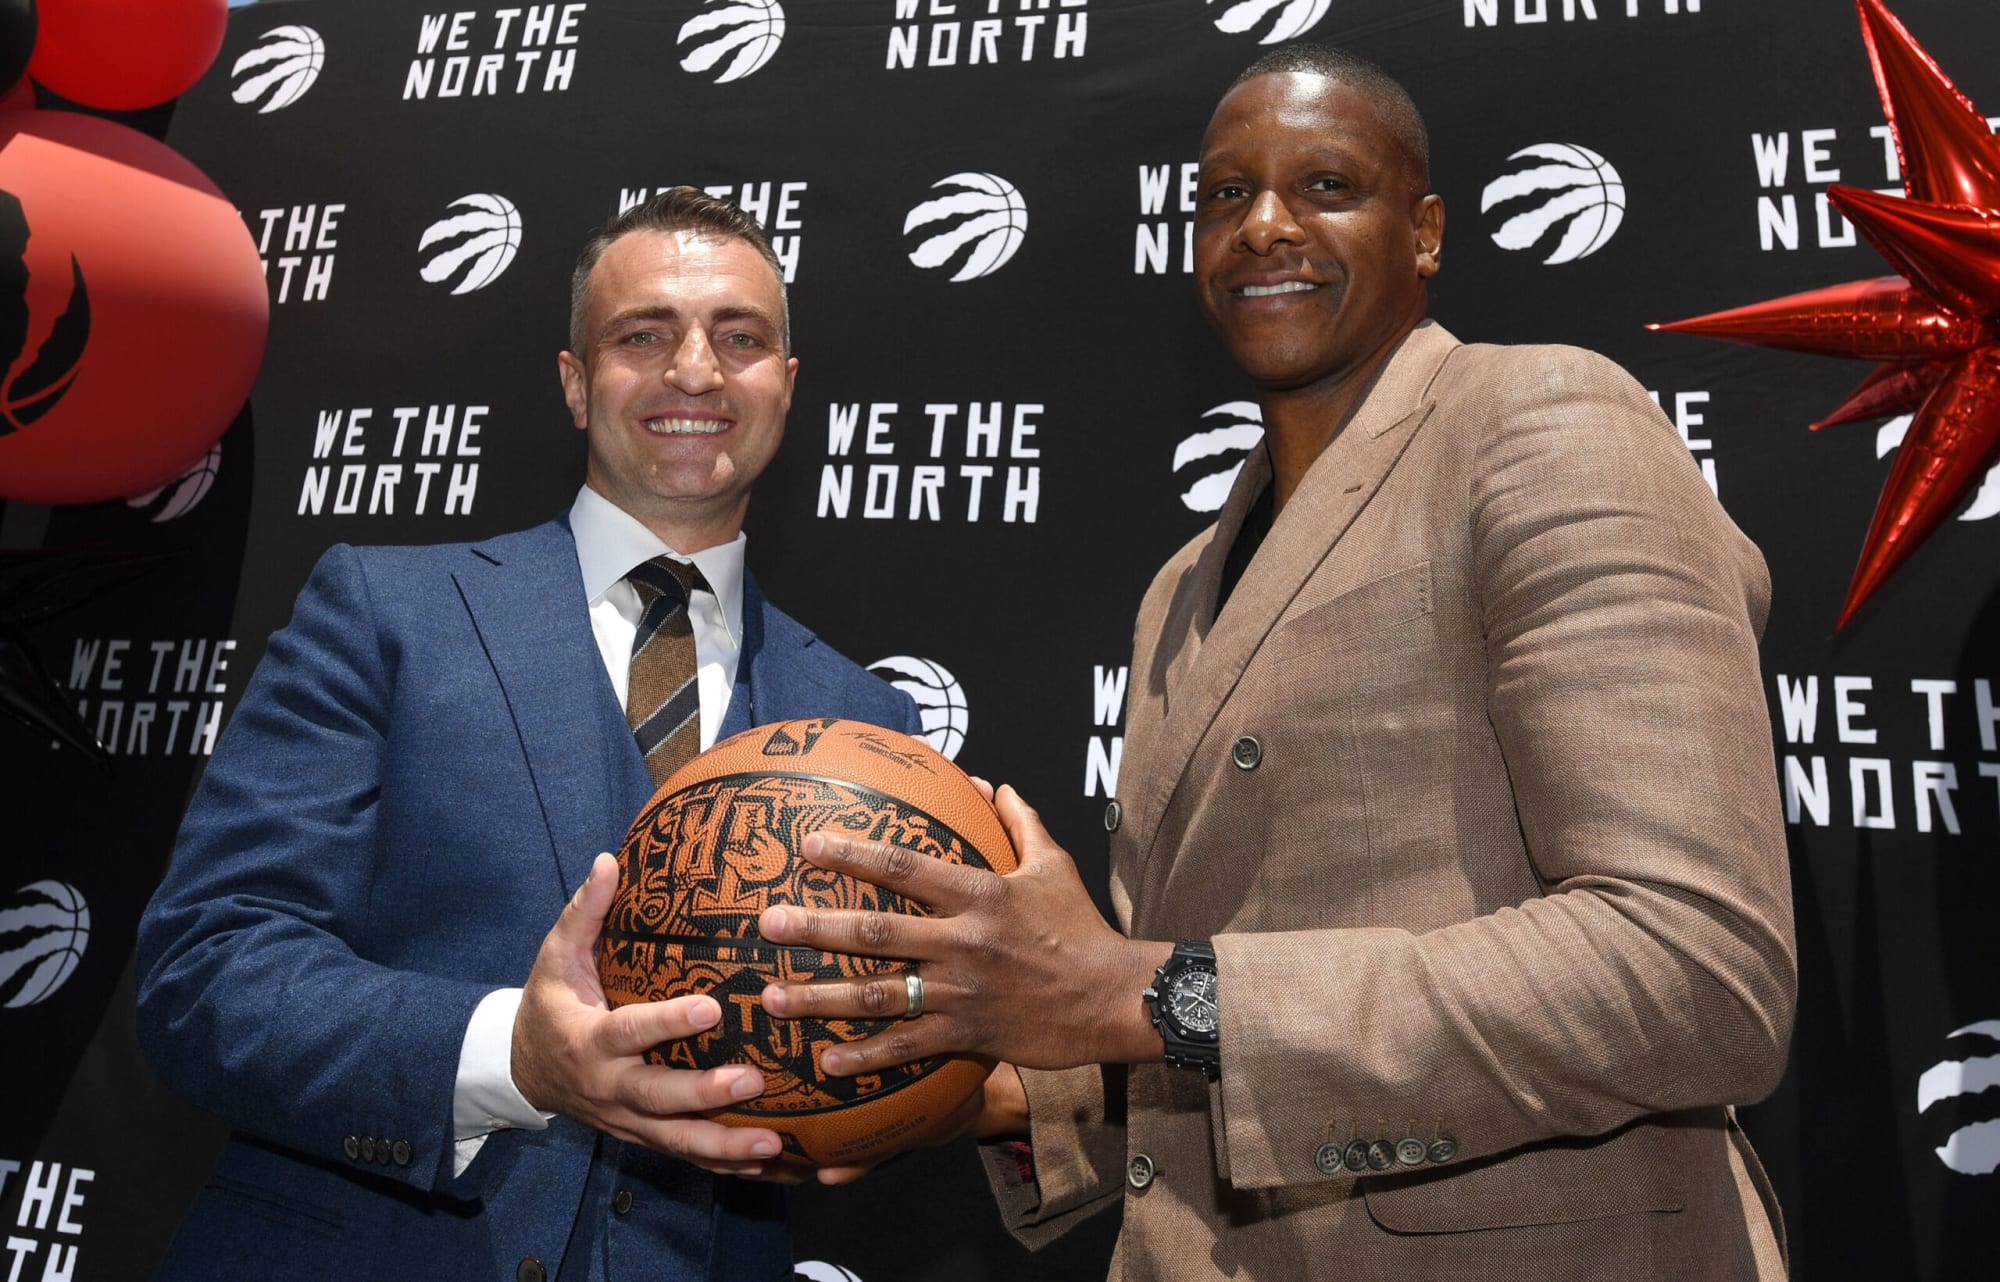 What should the Toronto Raptors take from the Cairns game